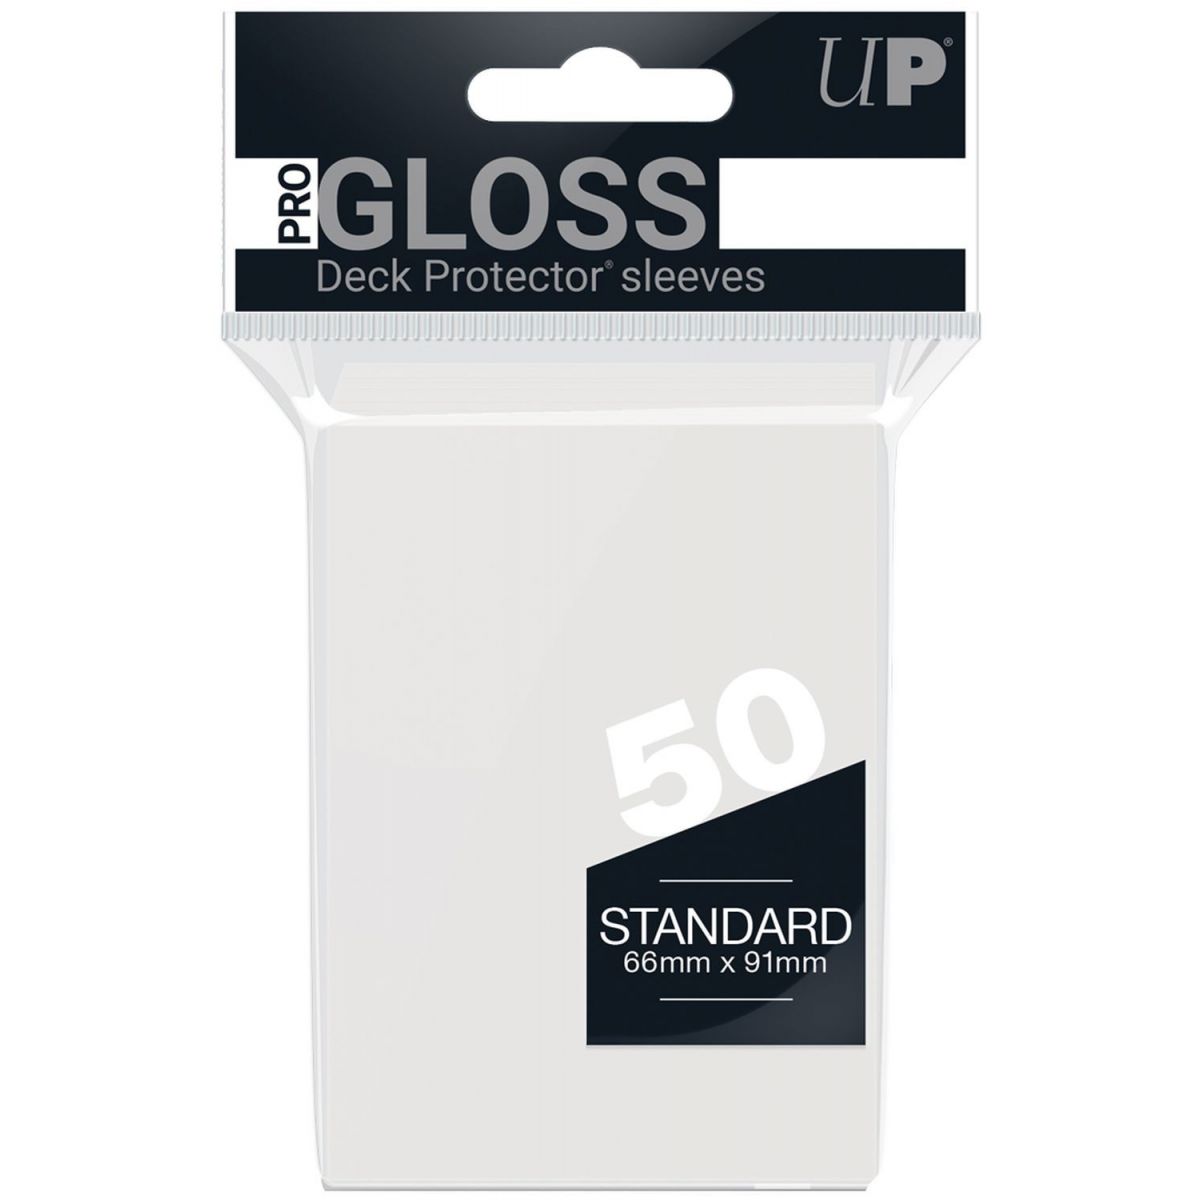 Ultra Pro - Card Sleeves - Standard - Clear - Transparent (50)